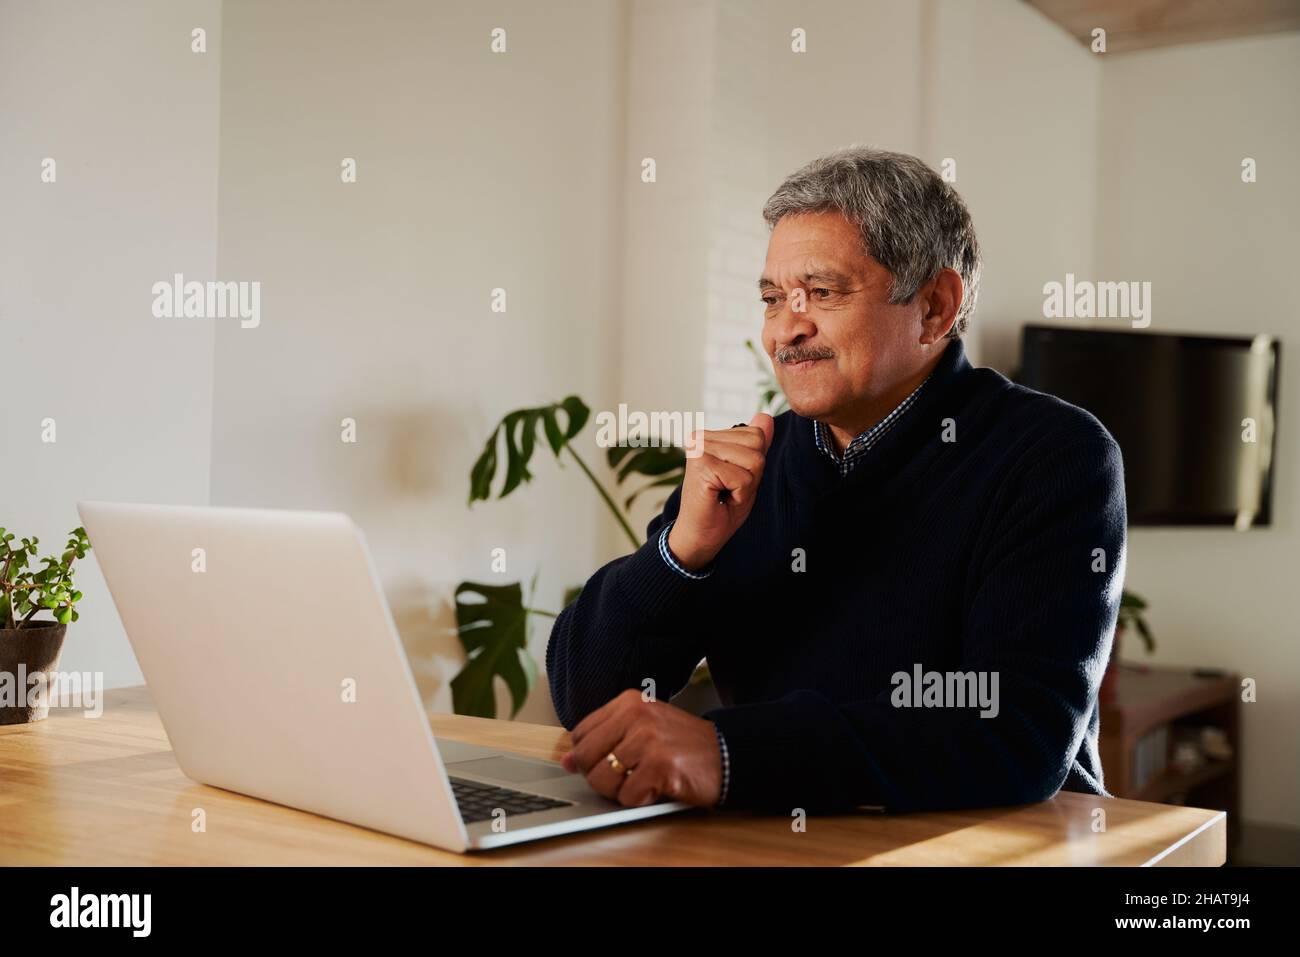 Multi-cultural elderly male frustrated while using laptop. Isolating in modern home, sitting at kitchen counter top. Stock Photo